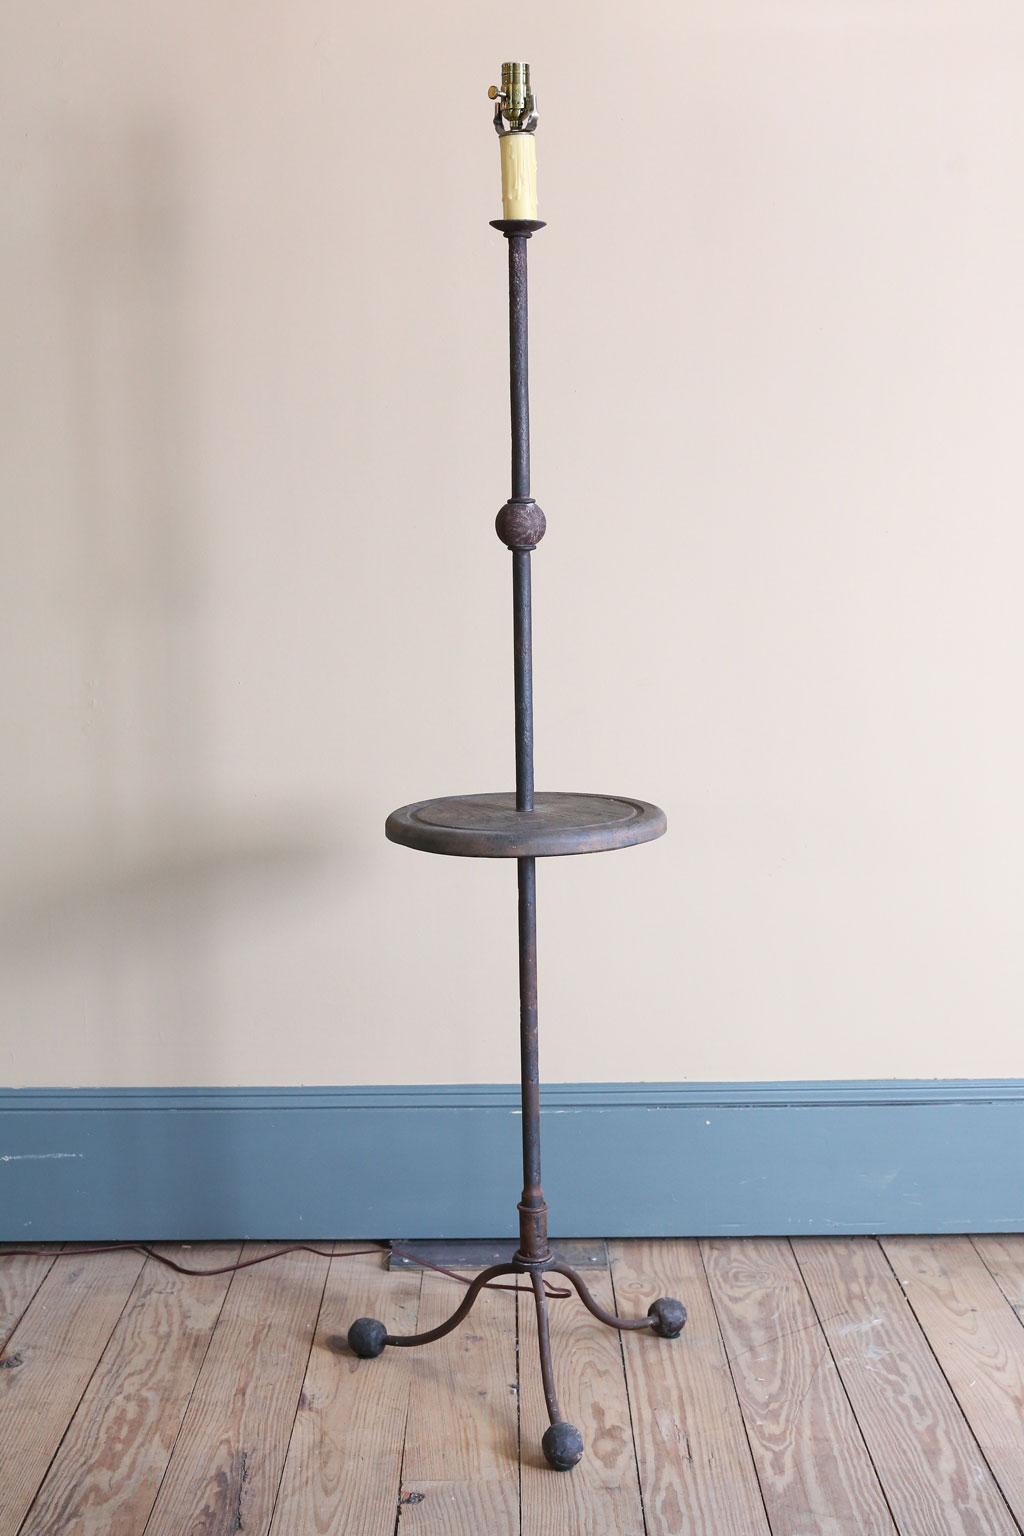 We make this lamp for our shop. It is made to order and we can adjust the height of the lamp to your desired height. It is nice for spaces where there is not room for a table and a light is needed.

It is forged iron and carved wood and hand-fished.